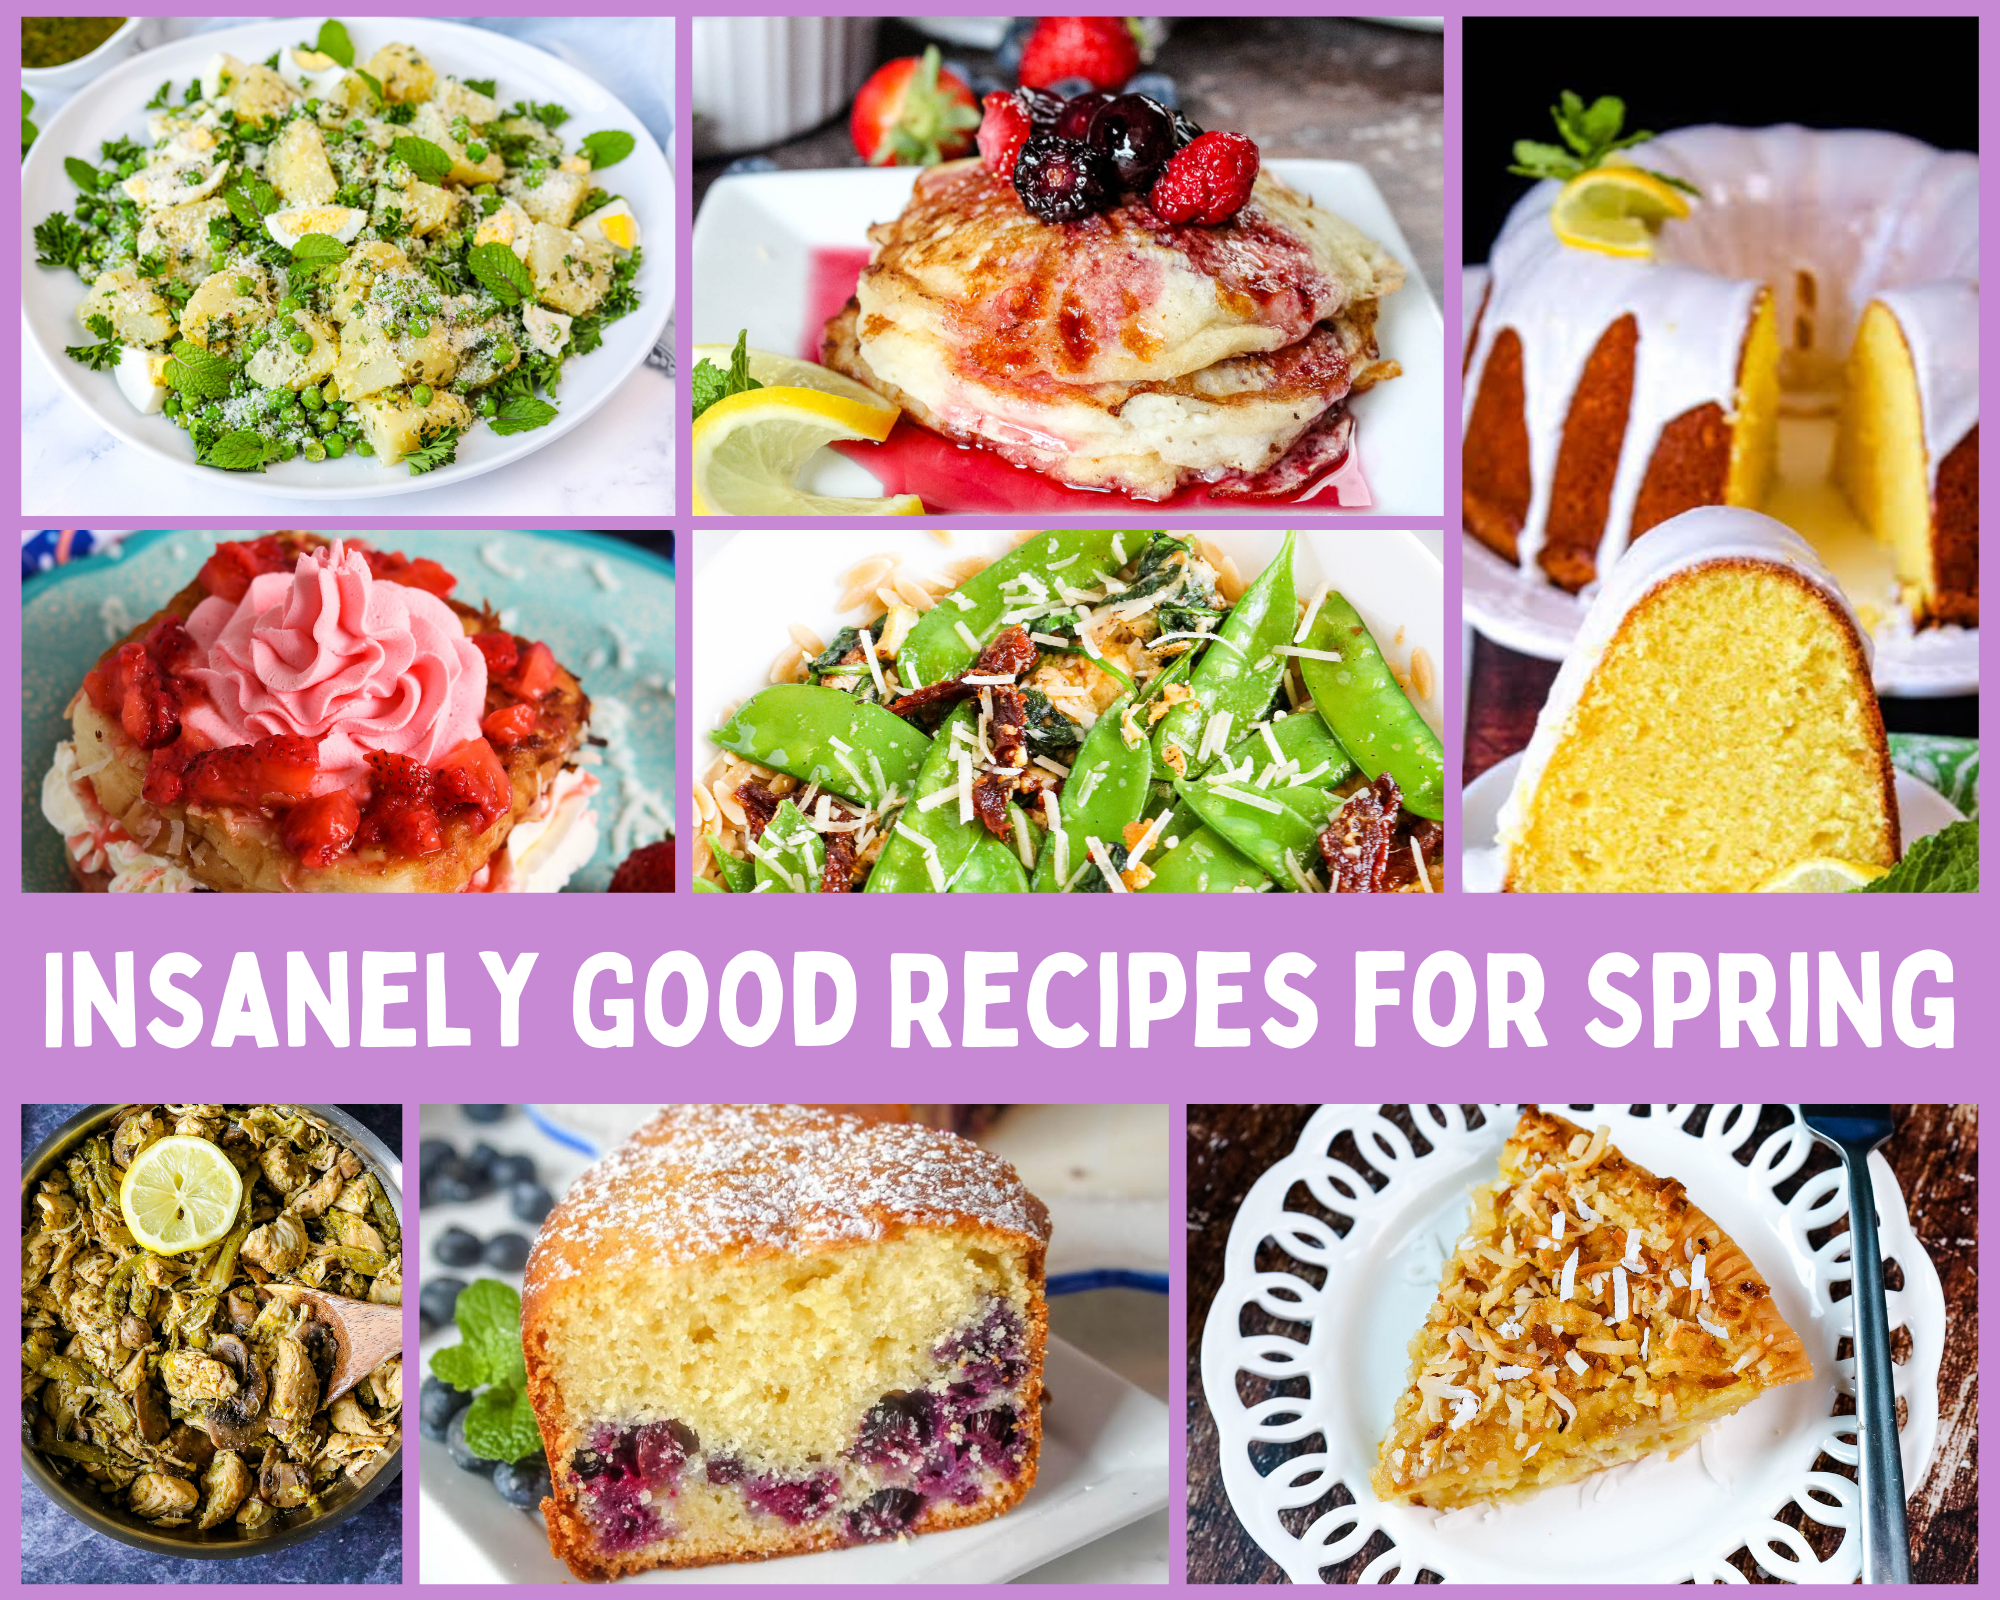 Insanely Good Recipes for Spring